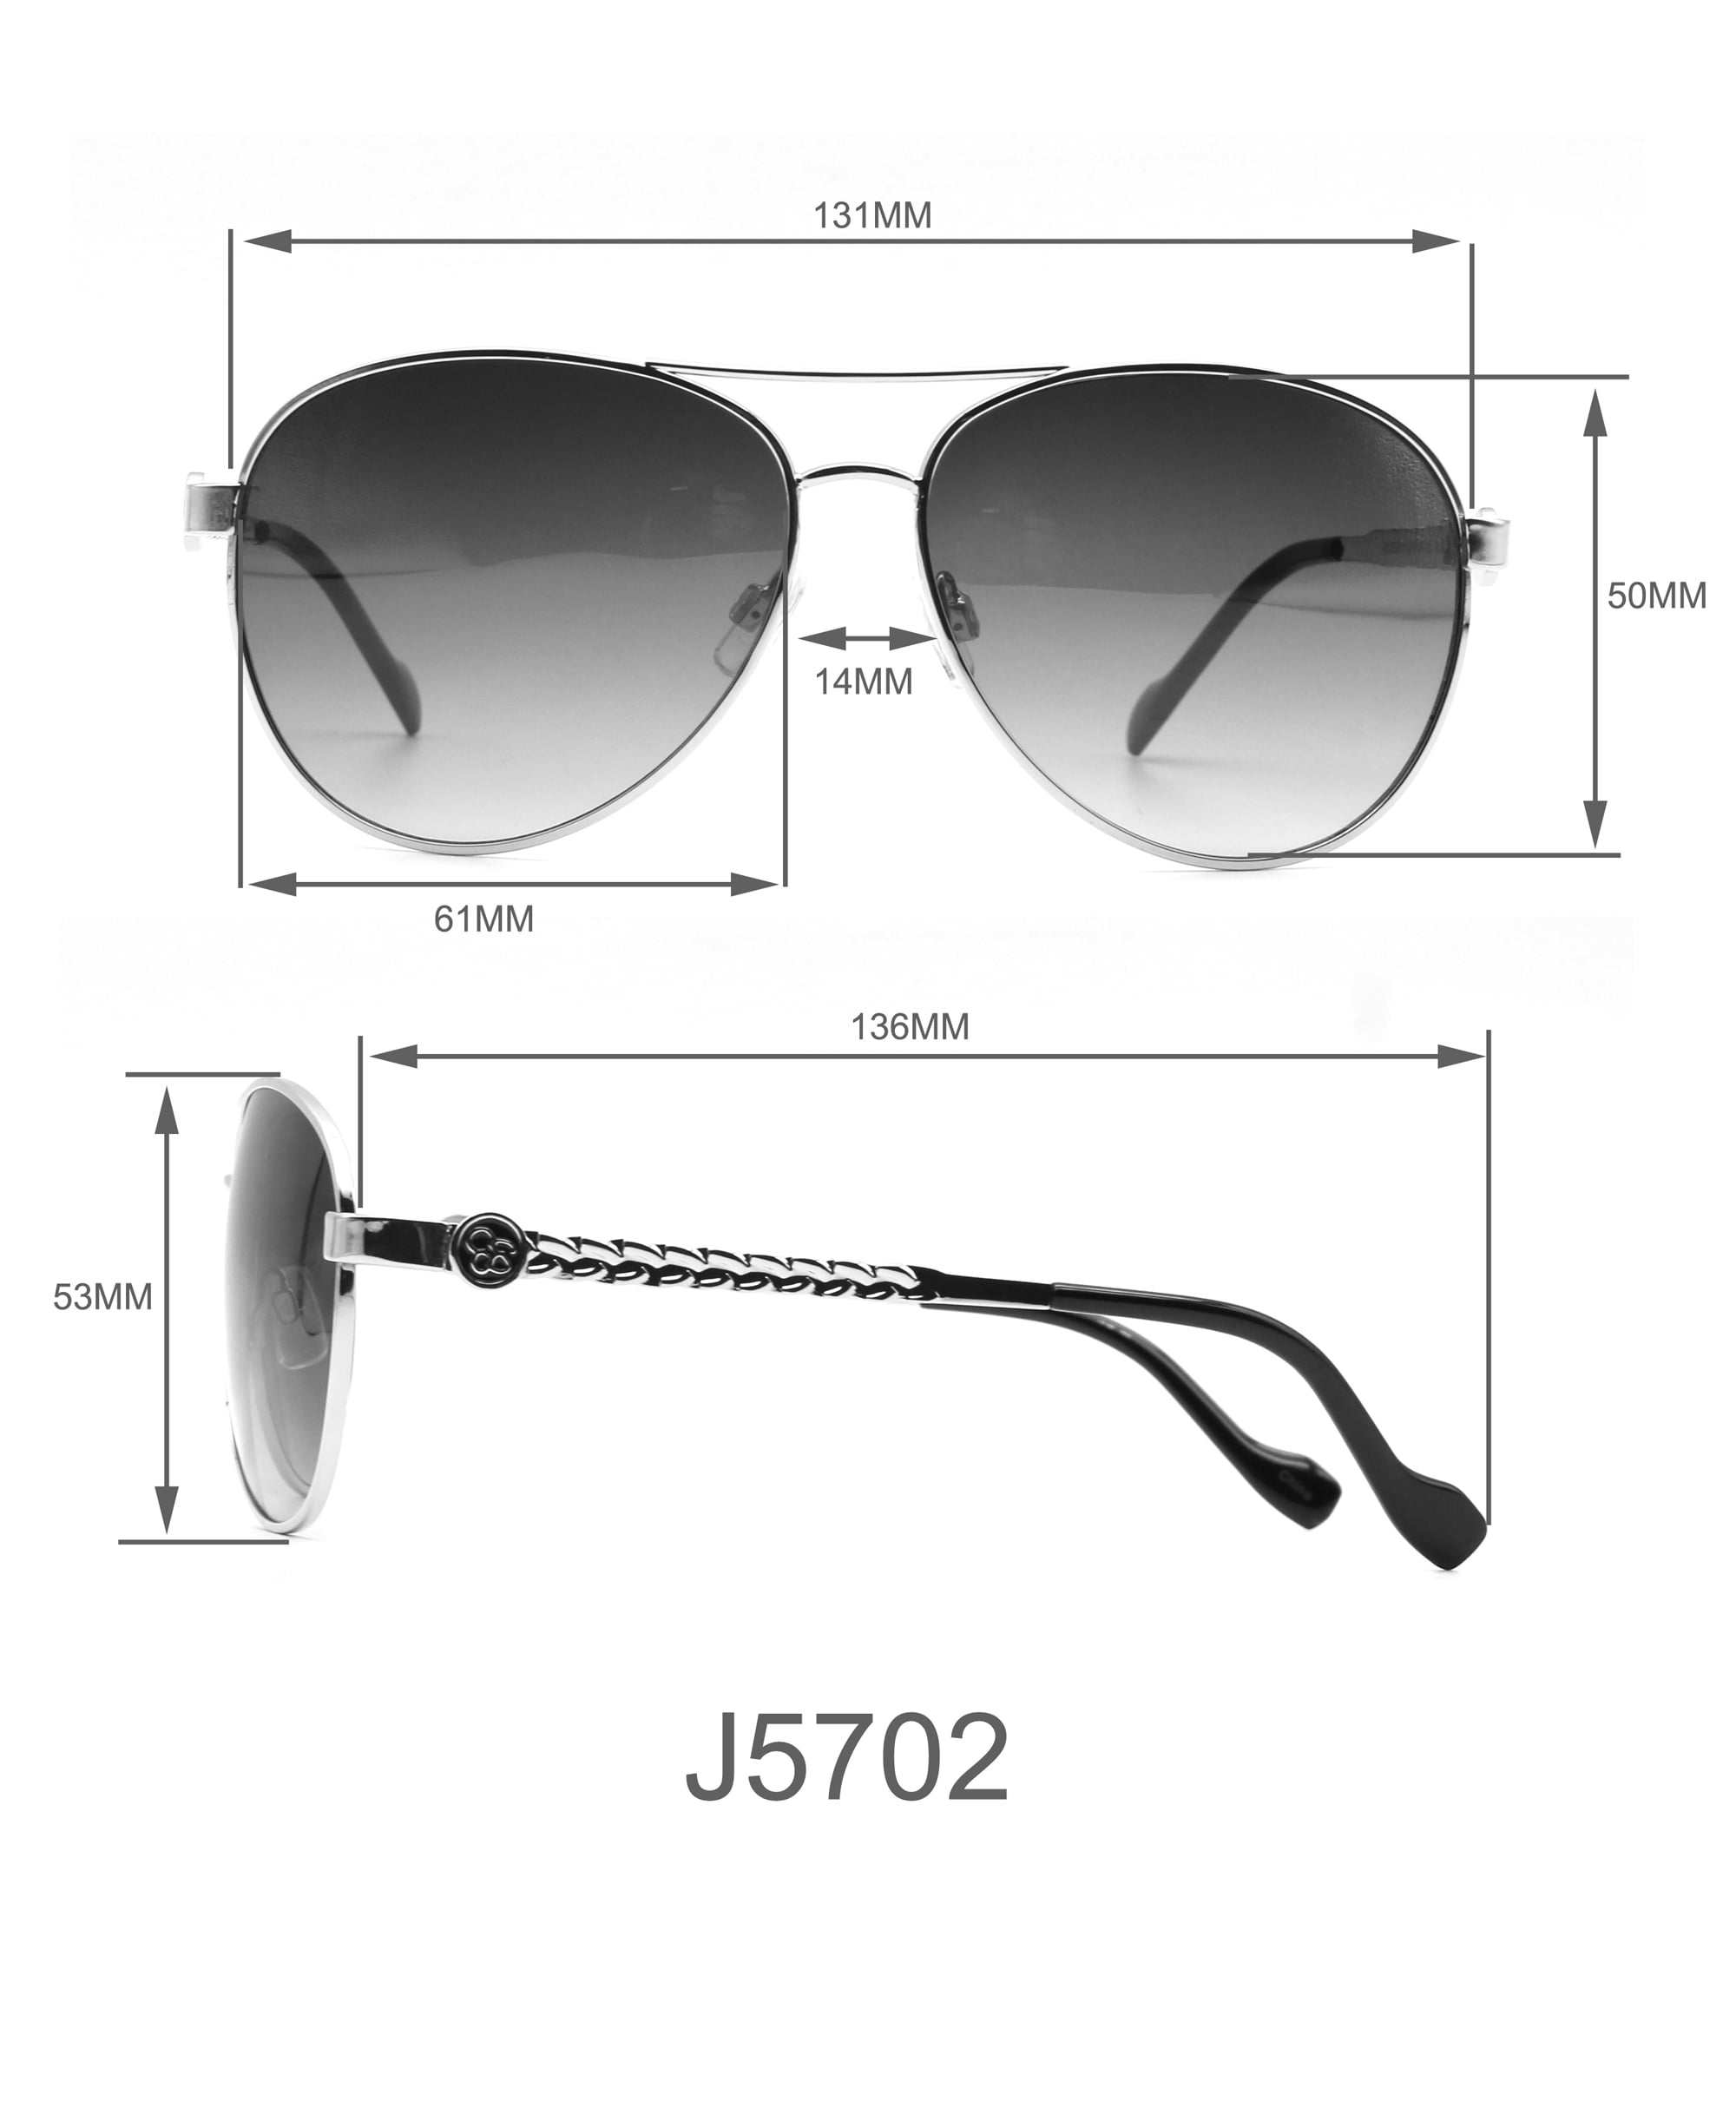 Jessica Simpson J5702 Metal UV400 Aviator Gifts for Women. Glam Protective for mm 61 Her, Sunglasses